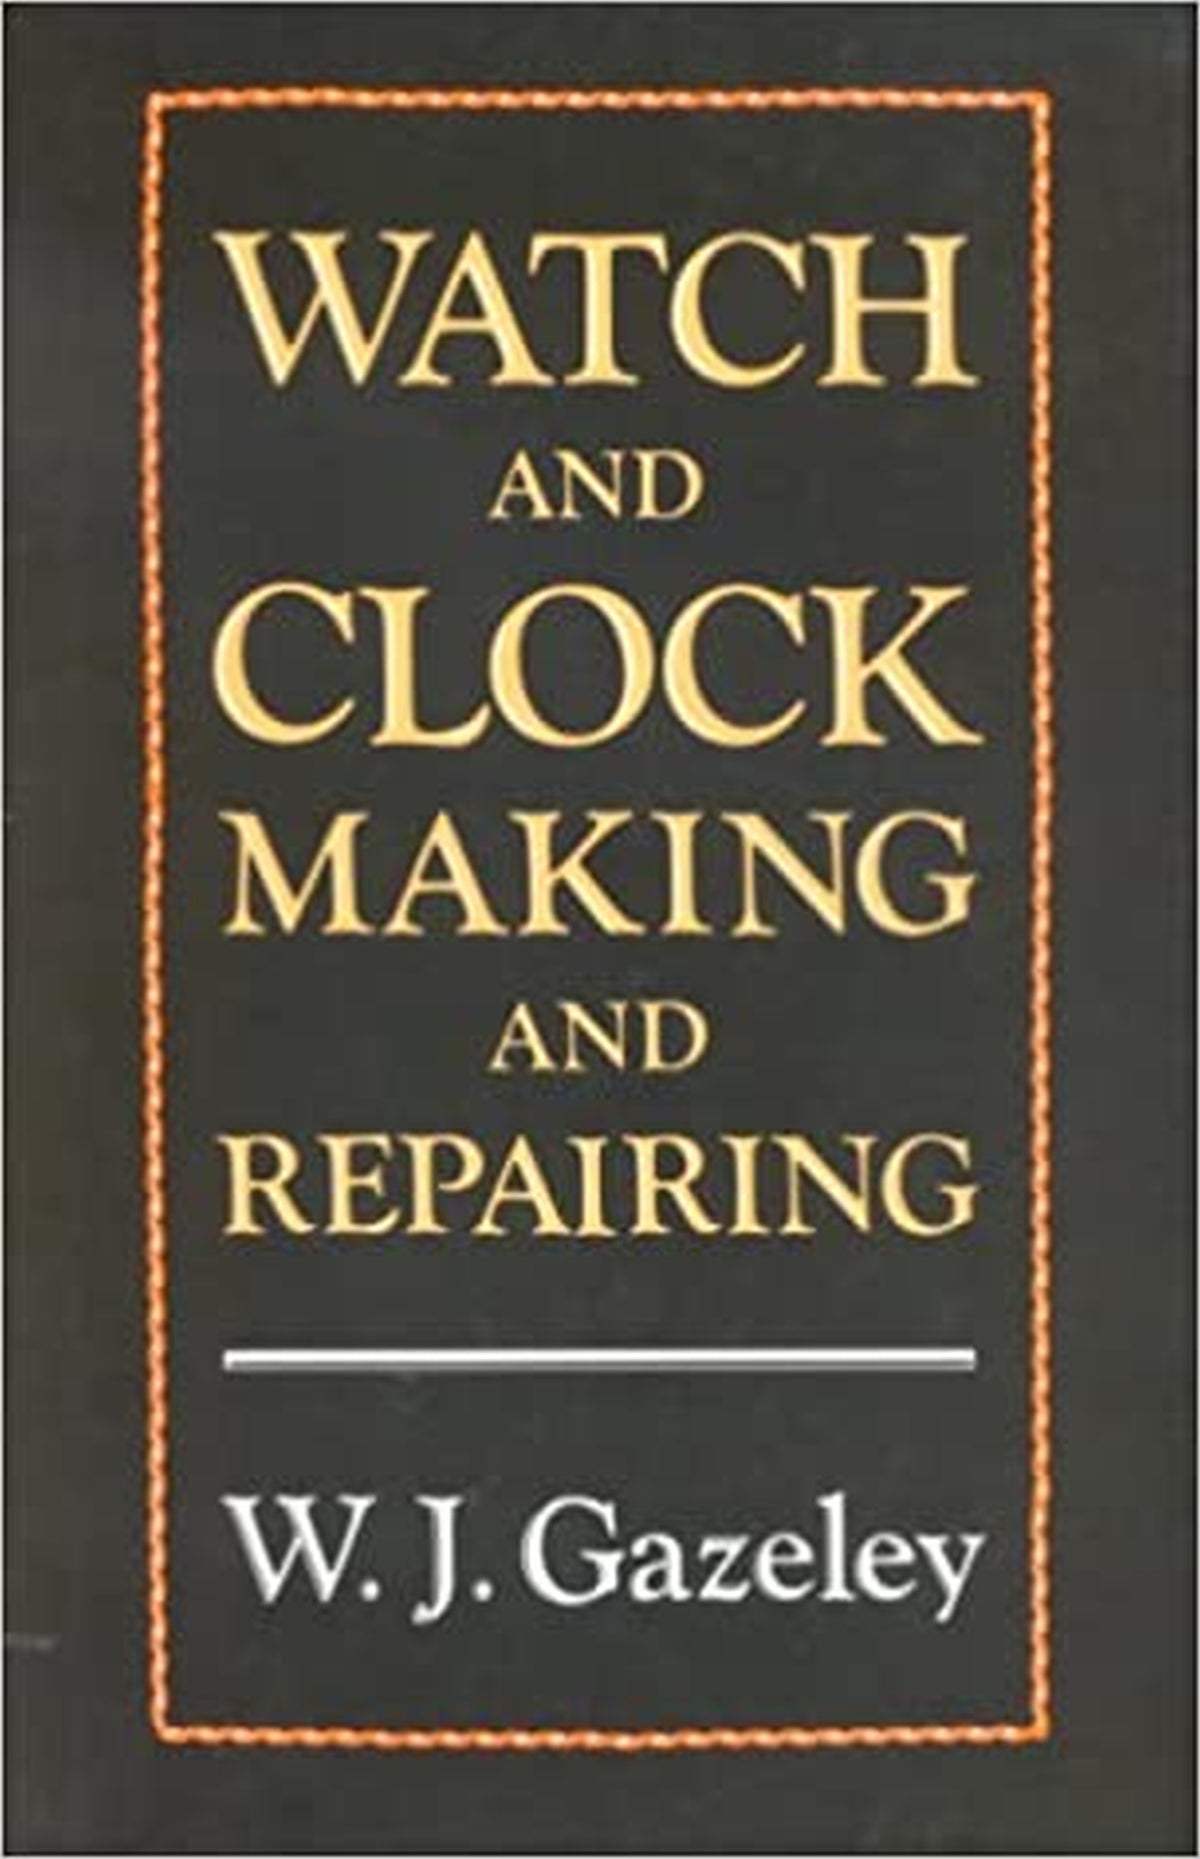 Watch and Clock Making and Repairing